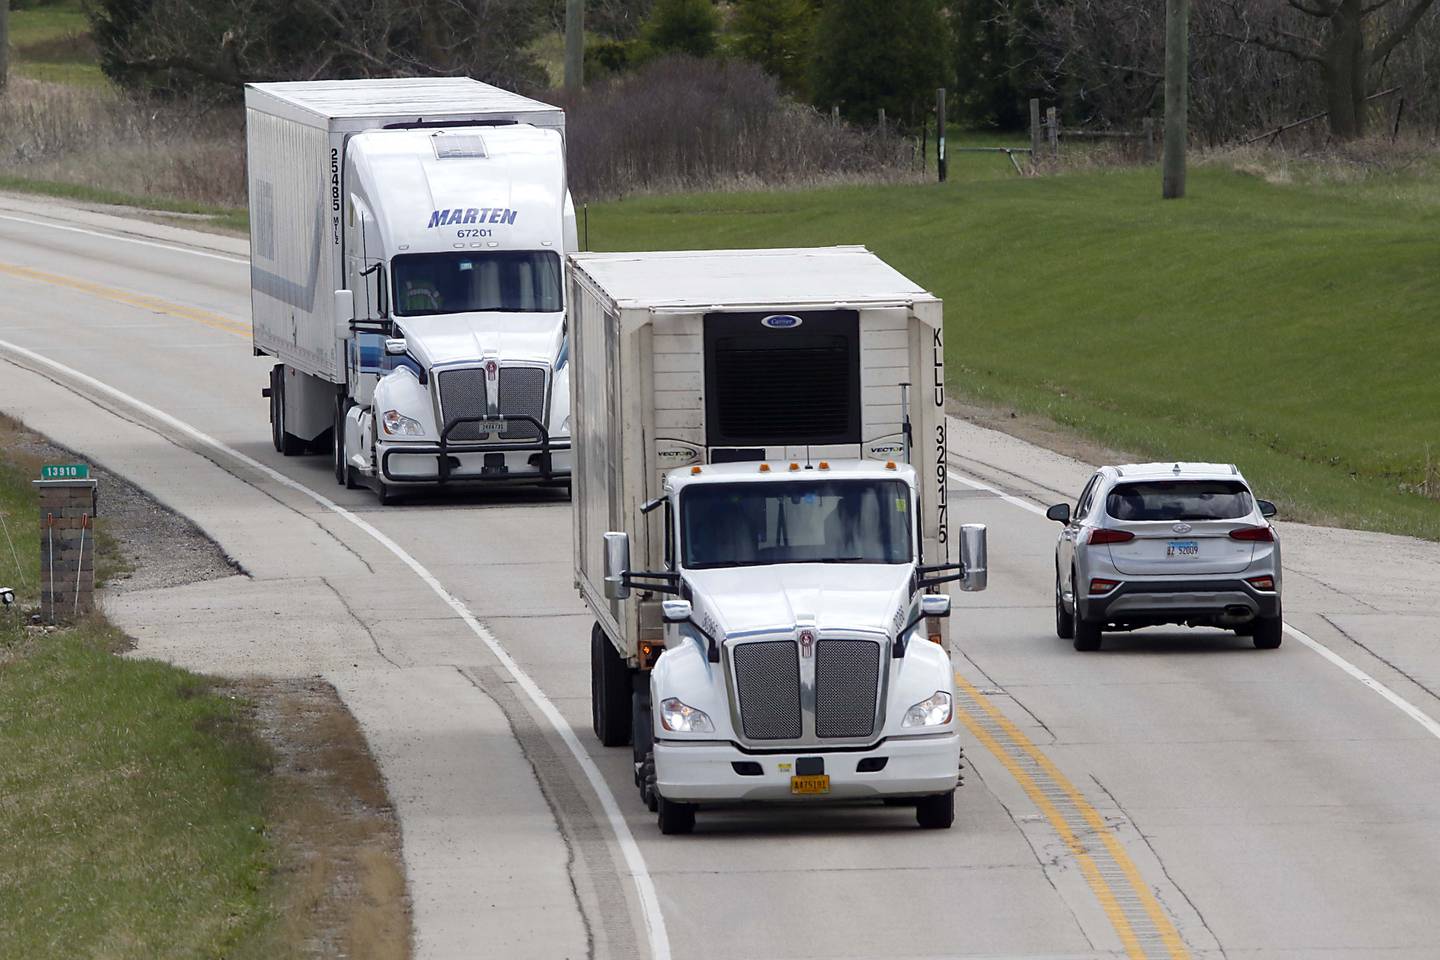 Vehicles travel U.S. Route 14 on Tuesday, April 26, 2022, near West South Street in Woodstock. The Illinois Department of Transportation is resurfacing a nearly six-mile stretch of U.S. Route 14, running west from Hughes and Hartland roads to IL Route 47. The road is a popular route from Woodstock to Harvard and into Wisconsin.